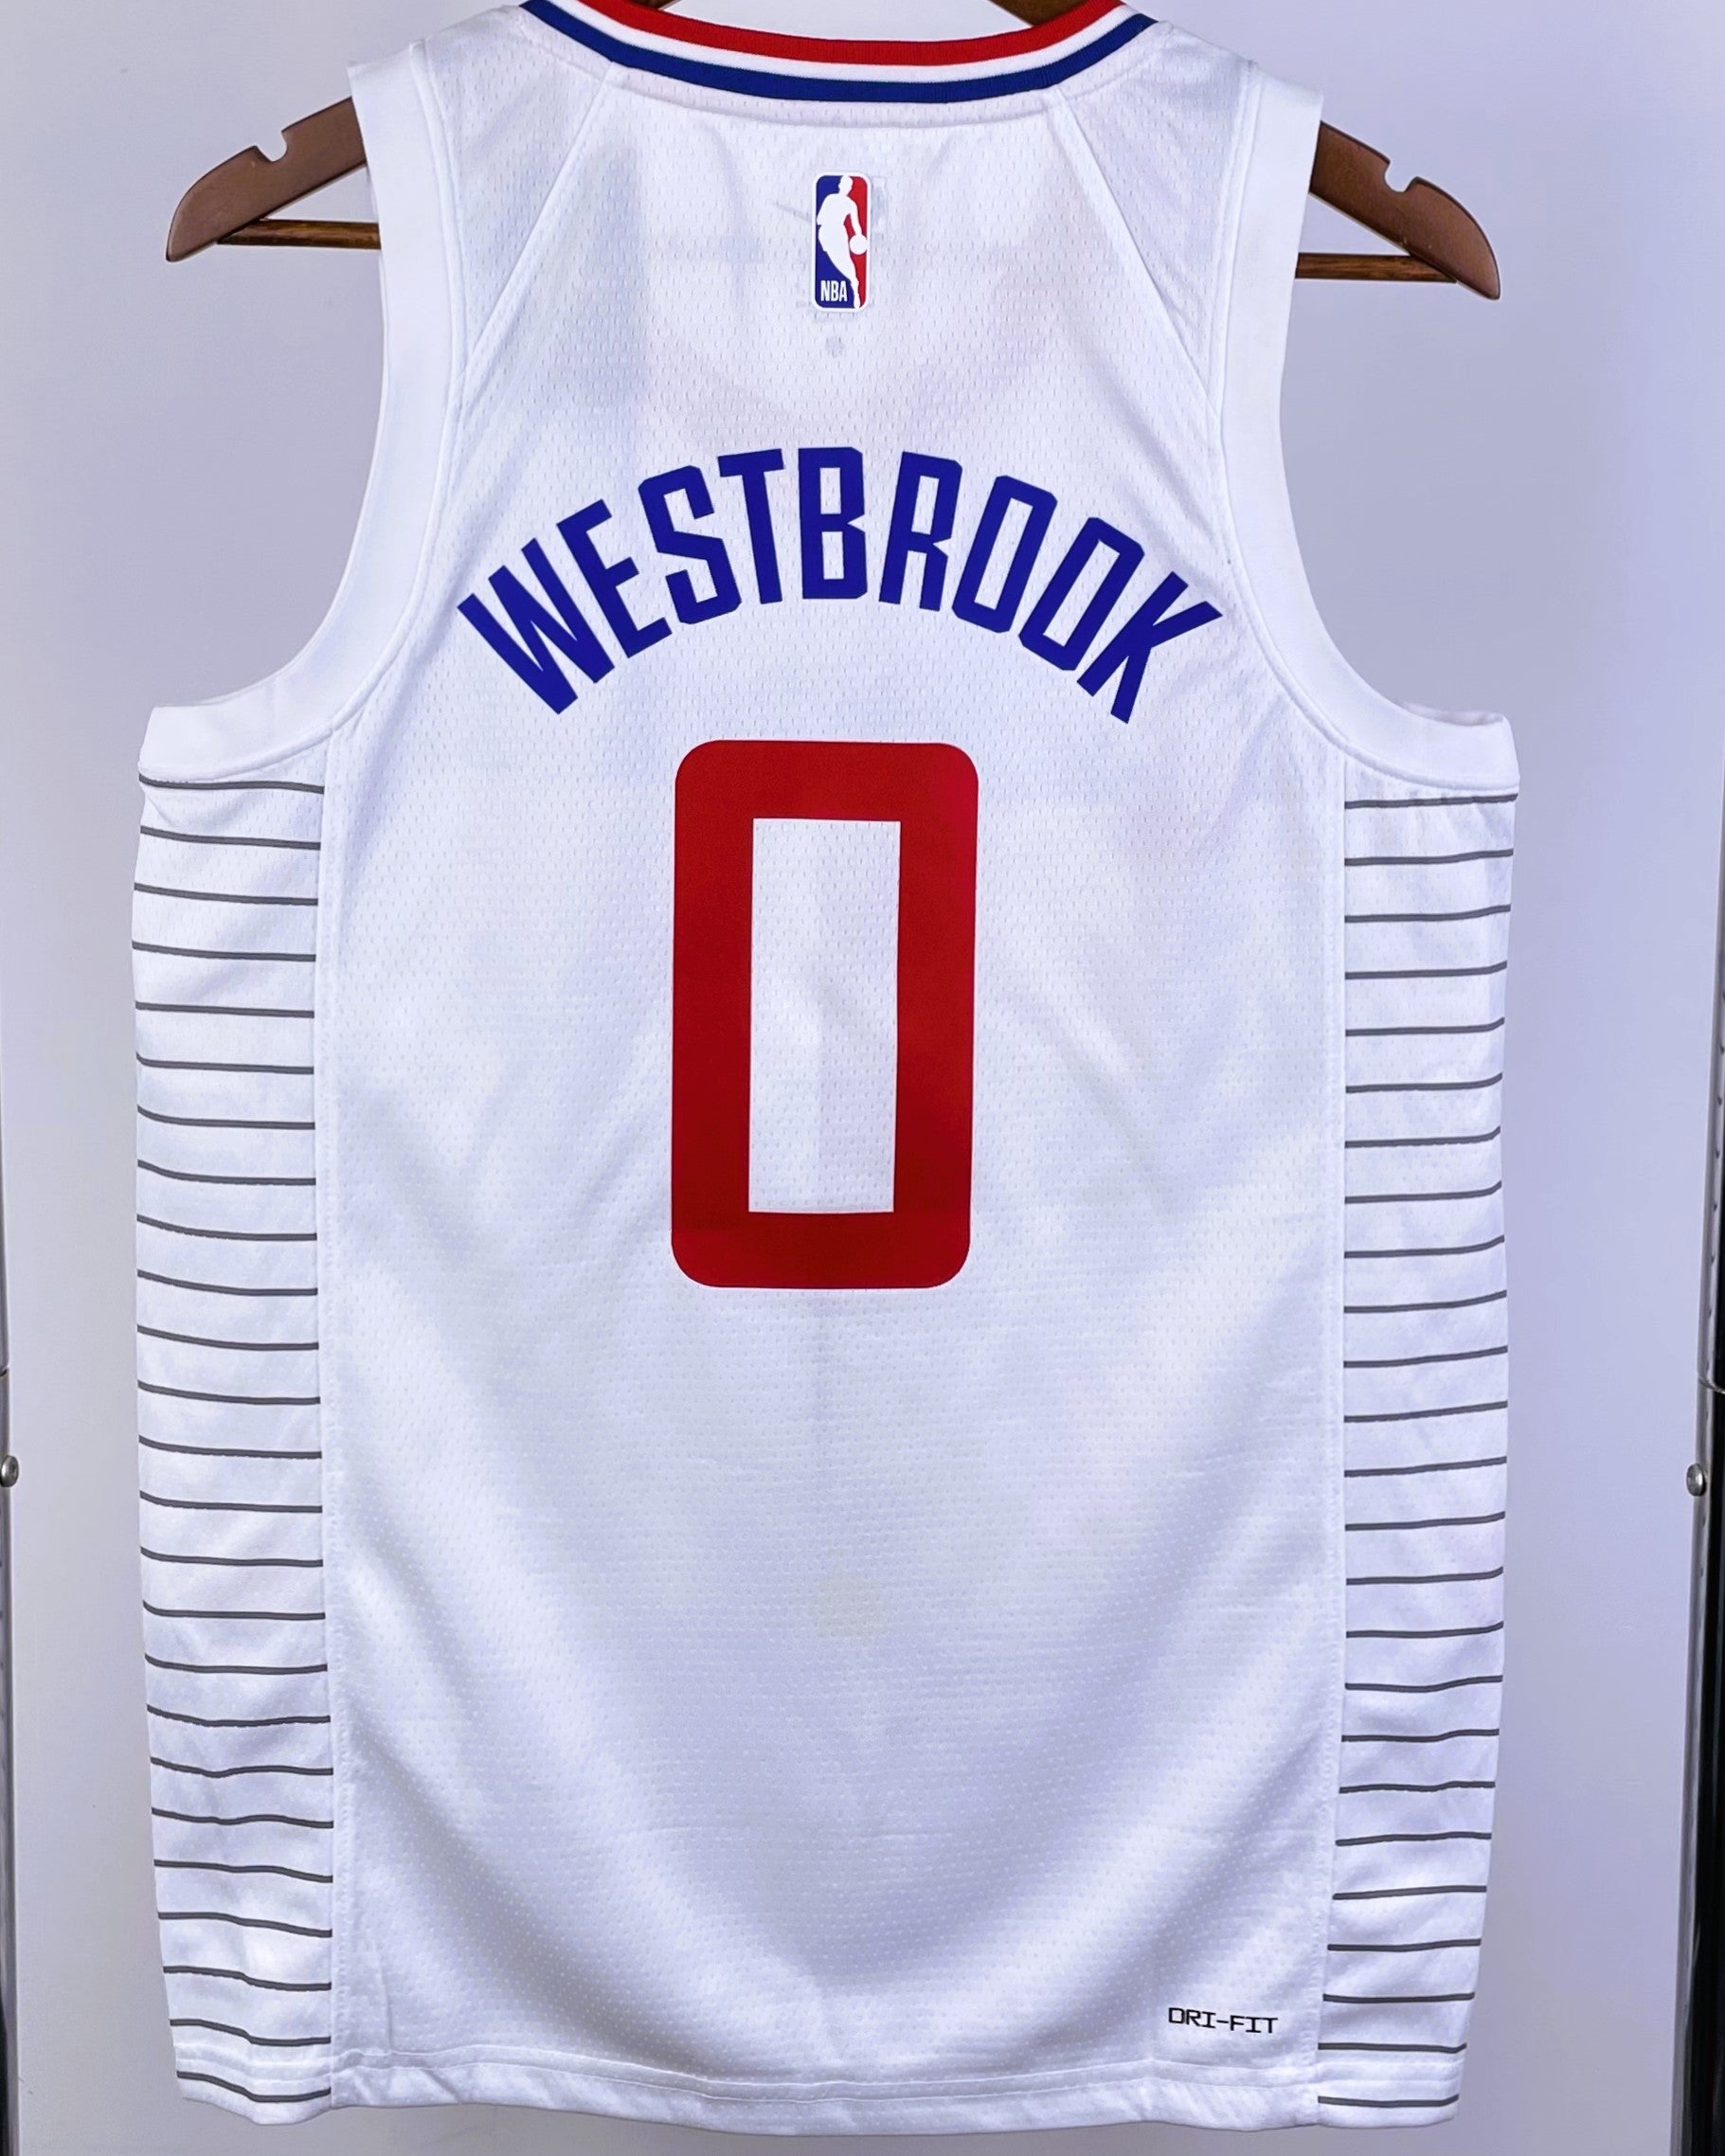 WESTBROOK RUSSELL (LaC)